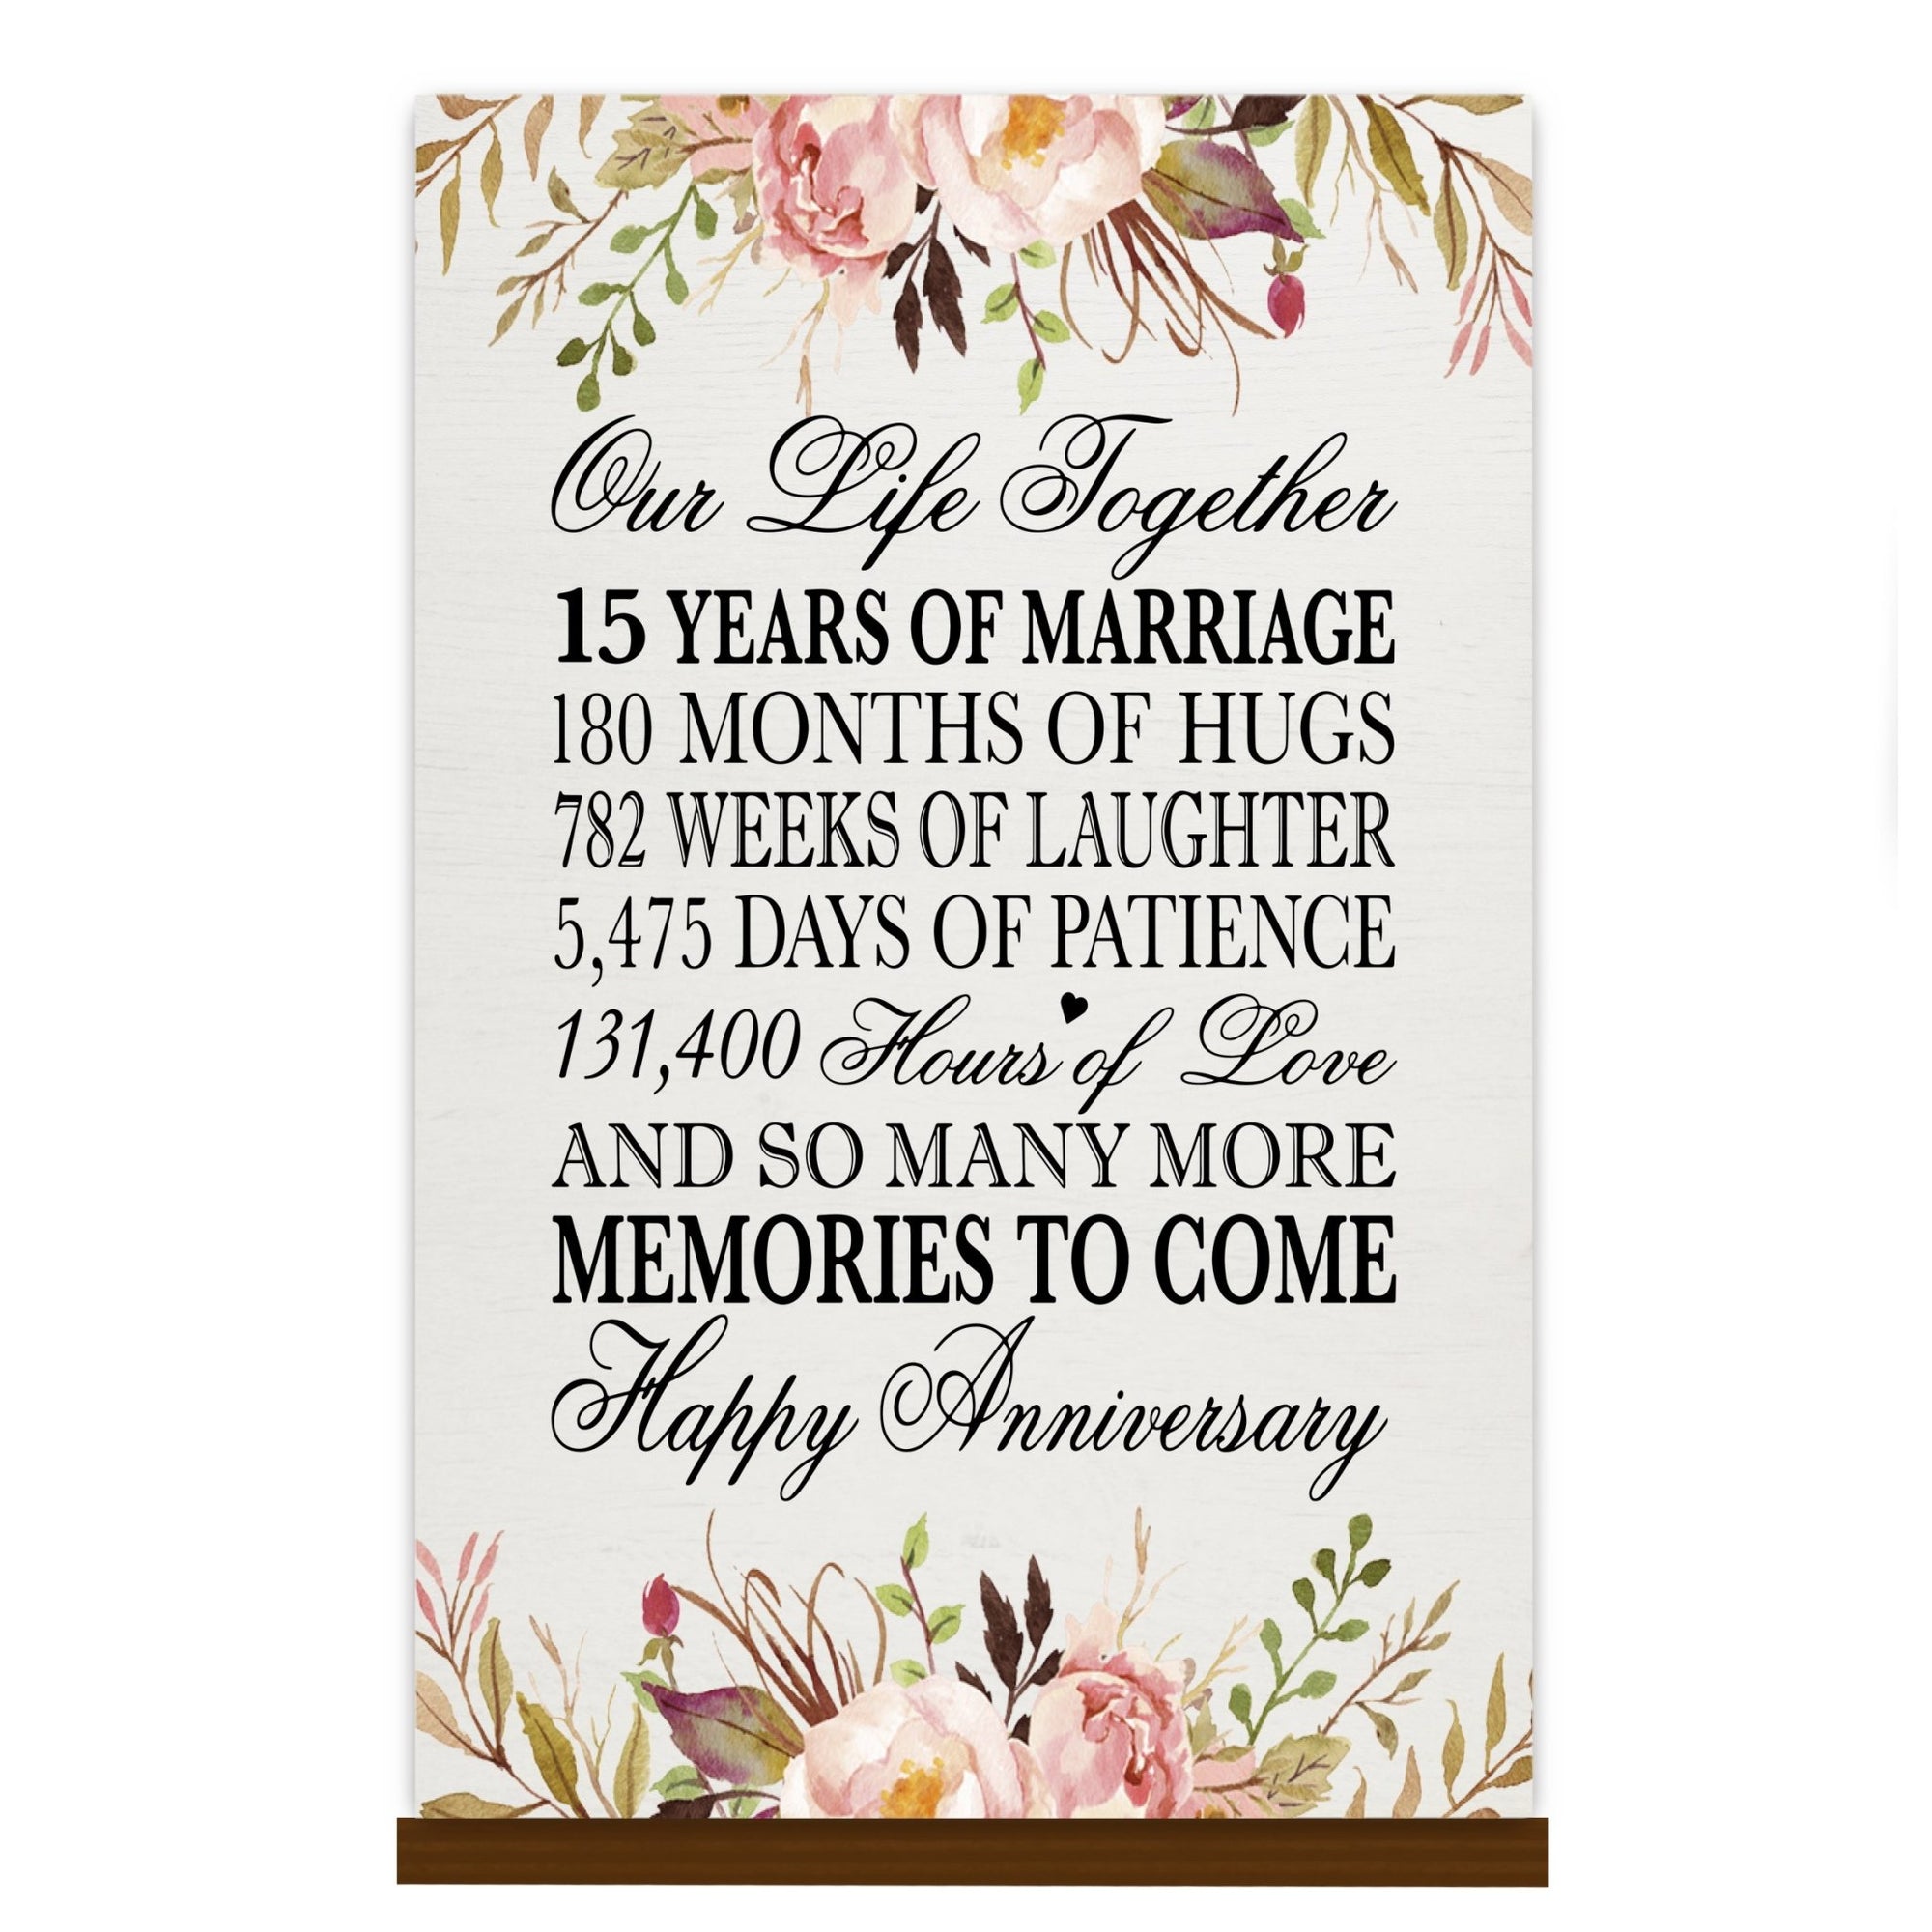 LifeSong Milestones 15th Anniversary Wall Plaque for Couples